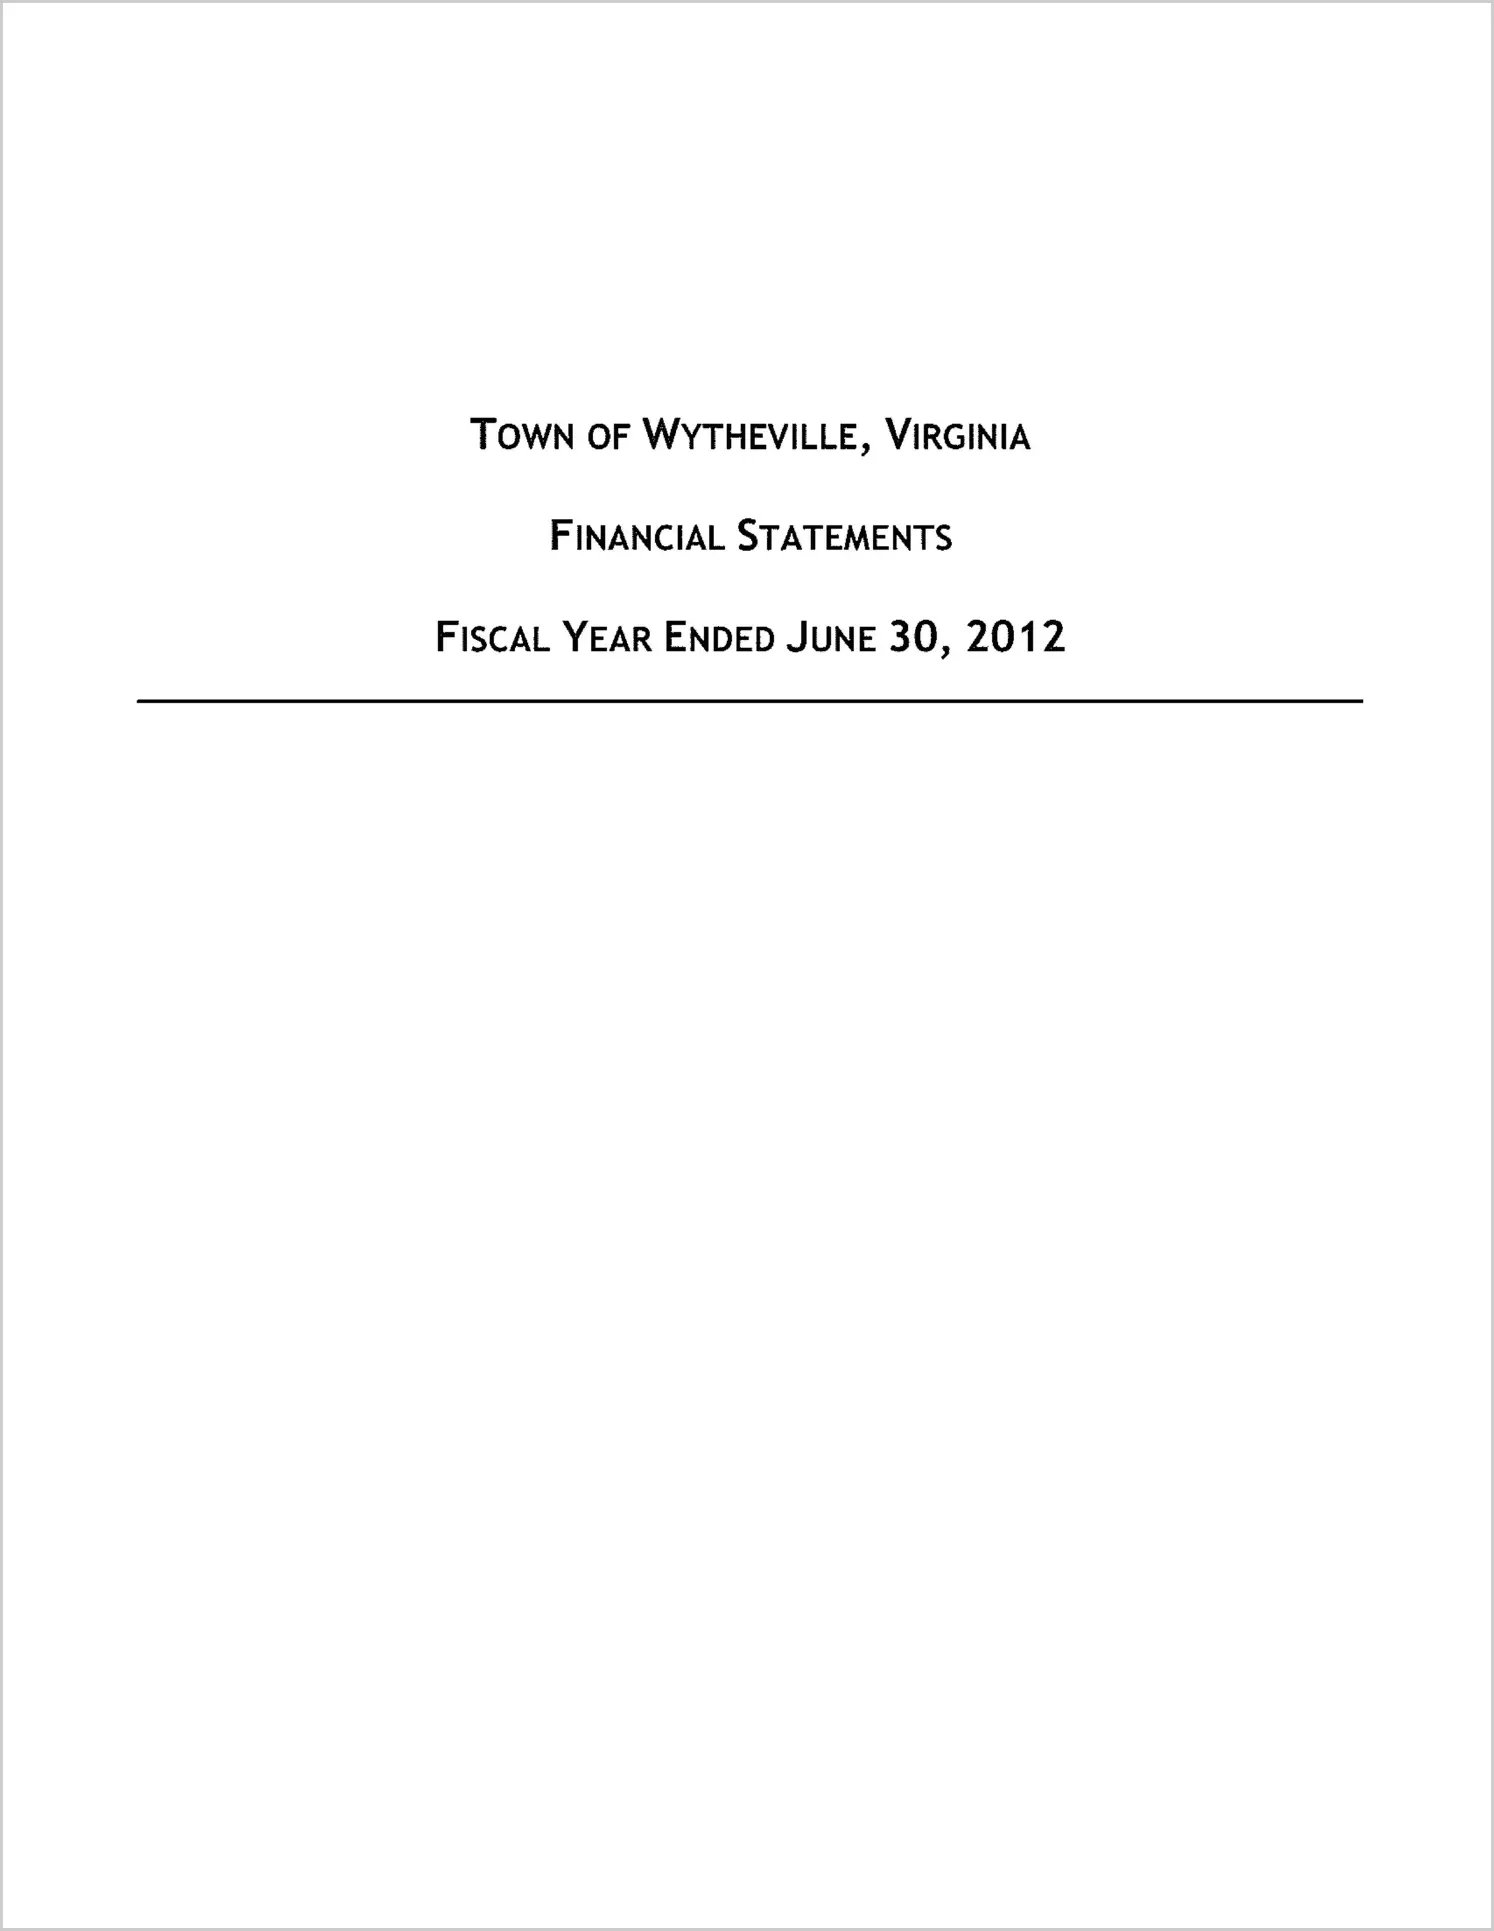 2012 Annual Financial Report for Town of Wytheville